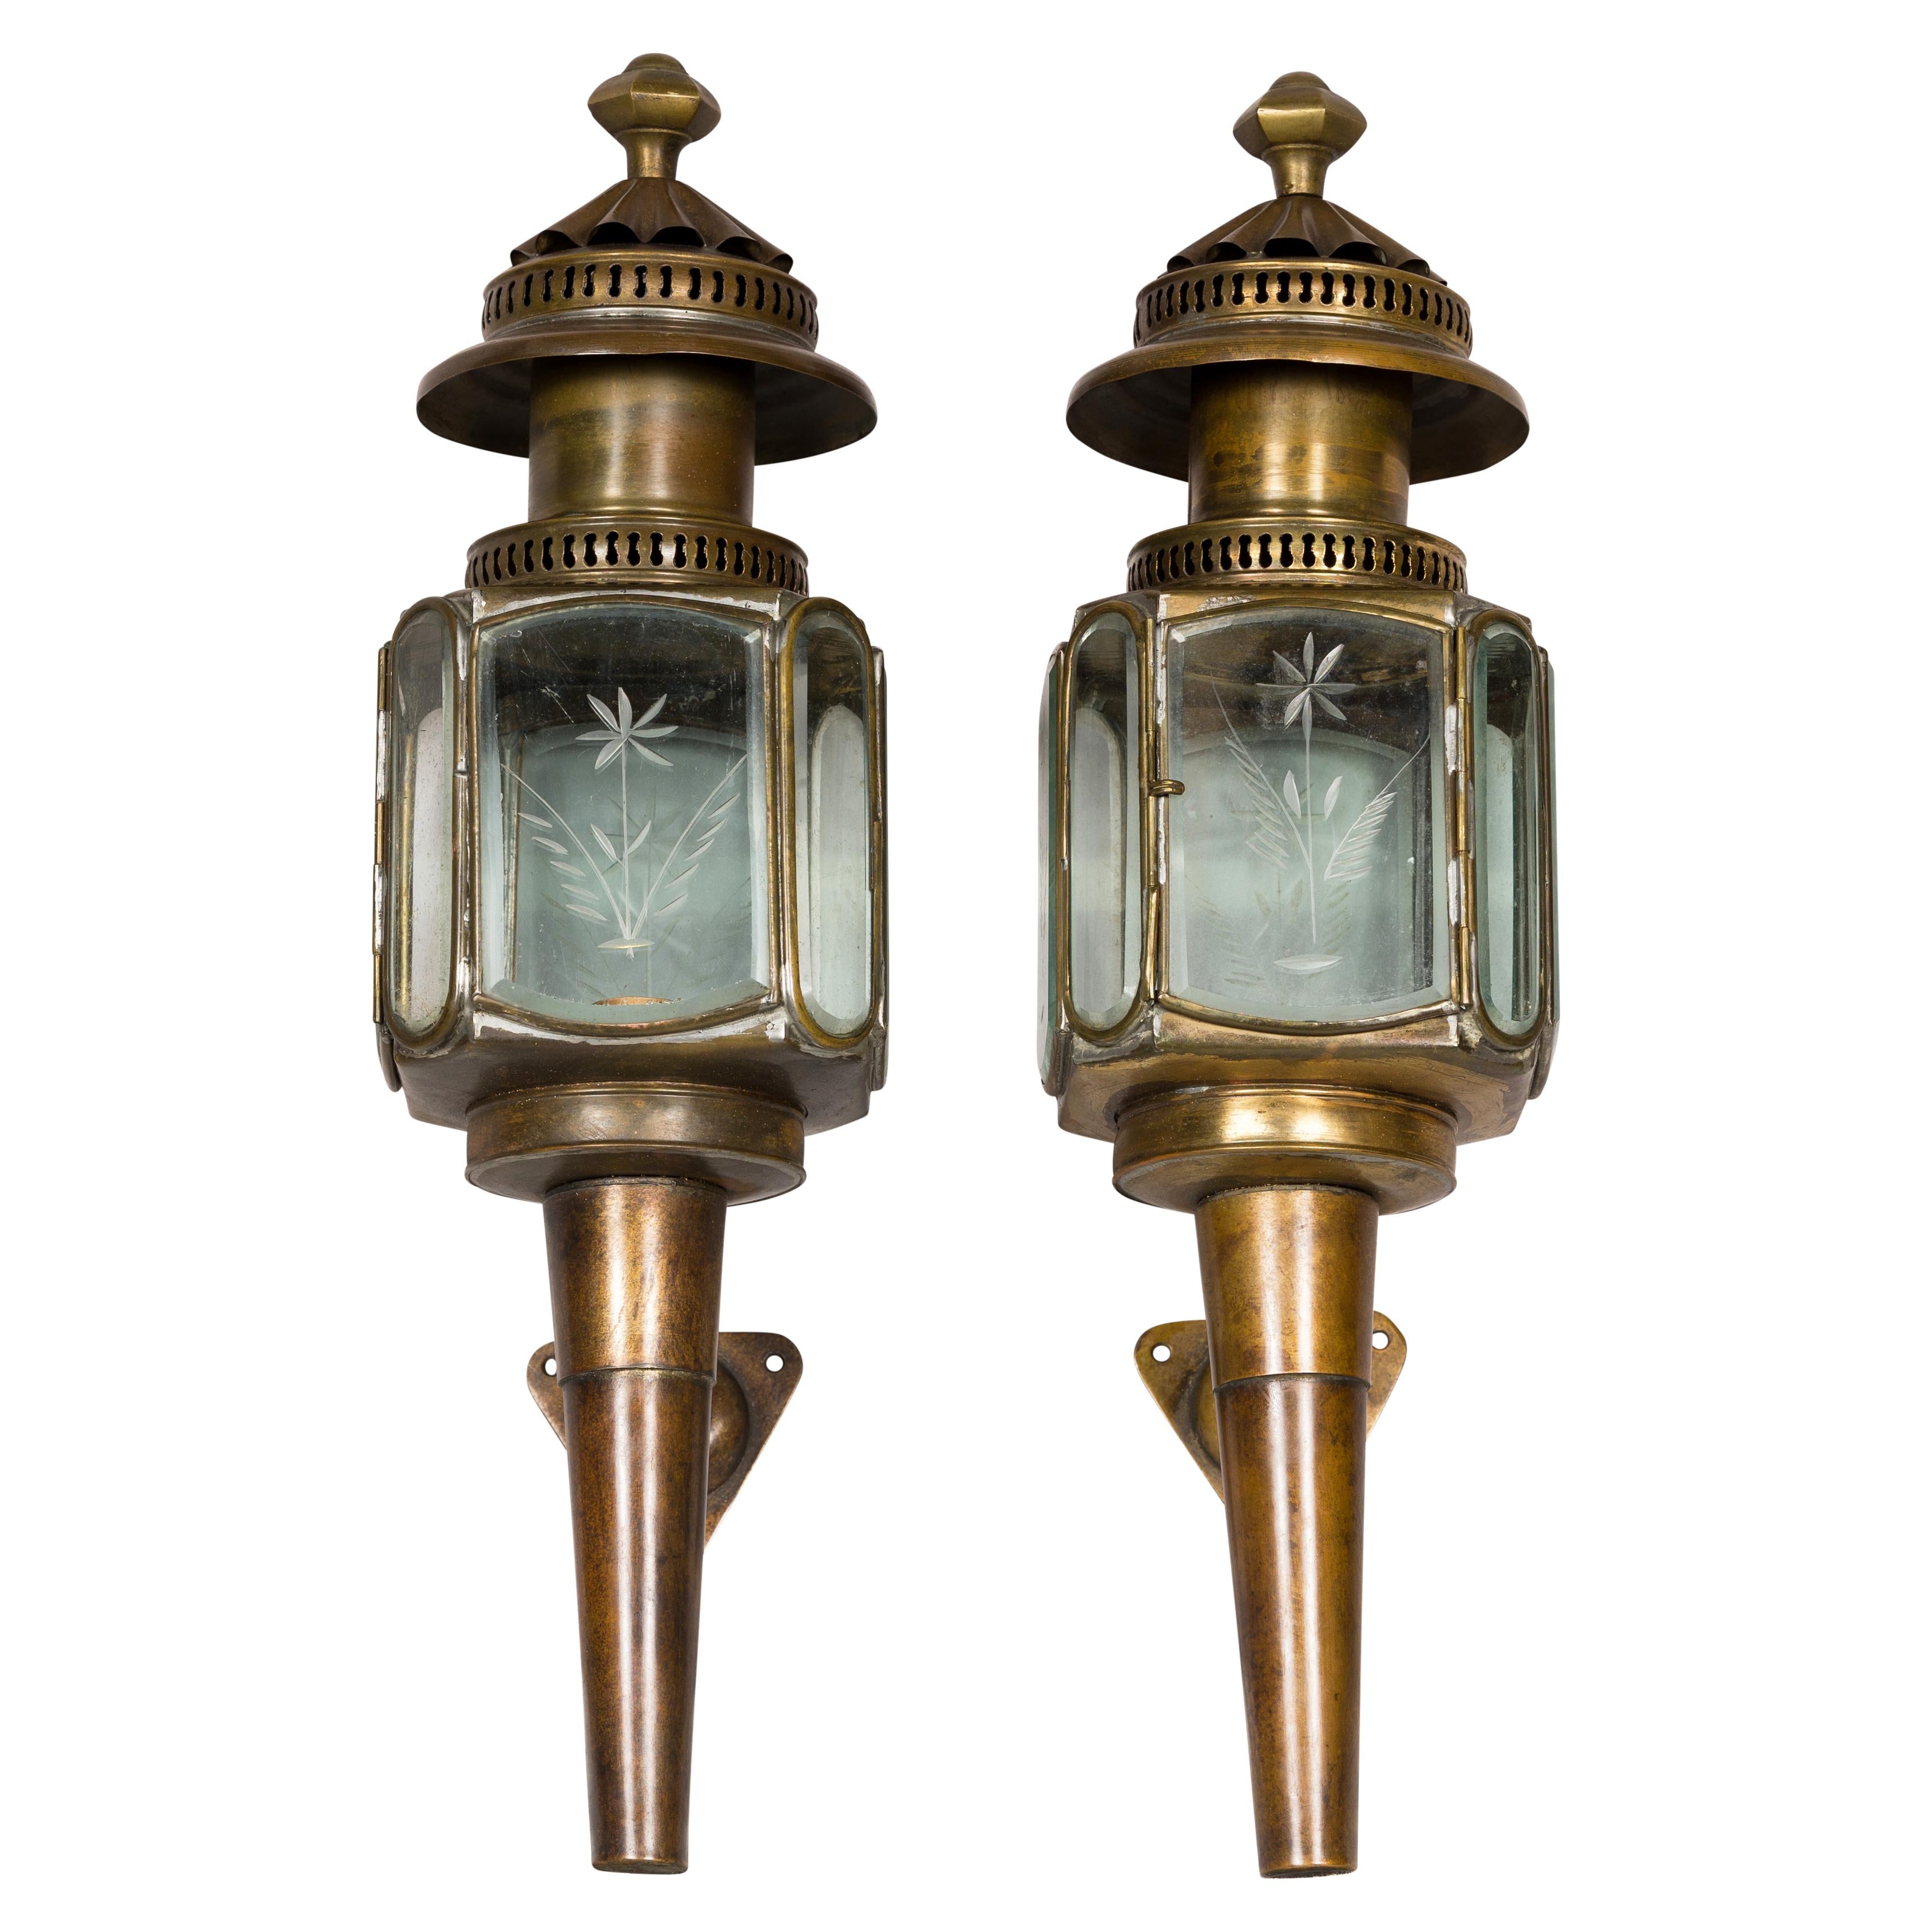 Pair of American Turn of the Century Wall Lanterns with Etched Glass, circa 1900 For Sale 13